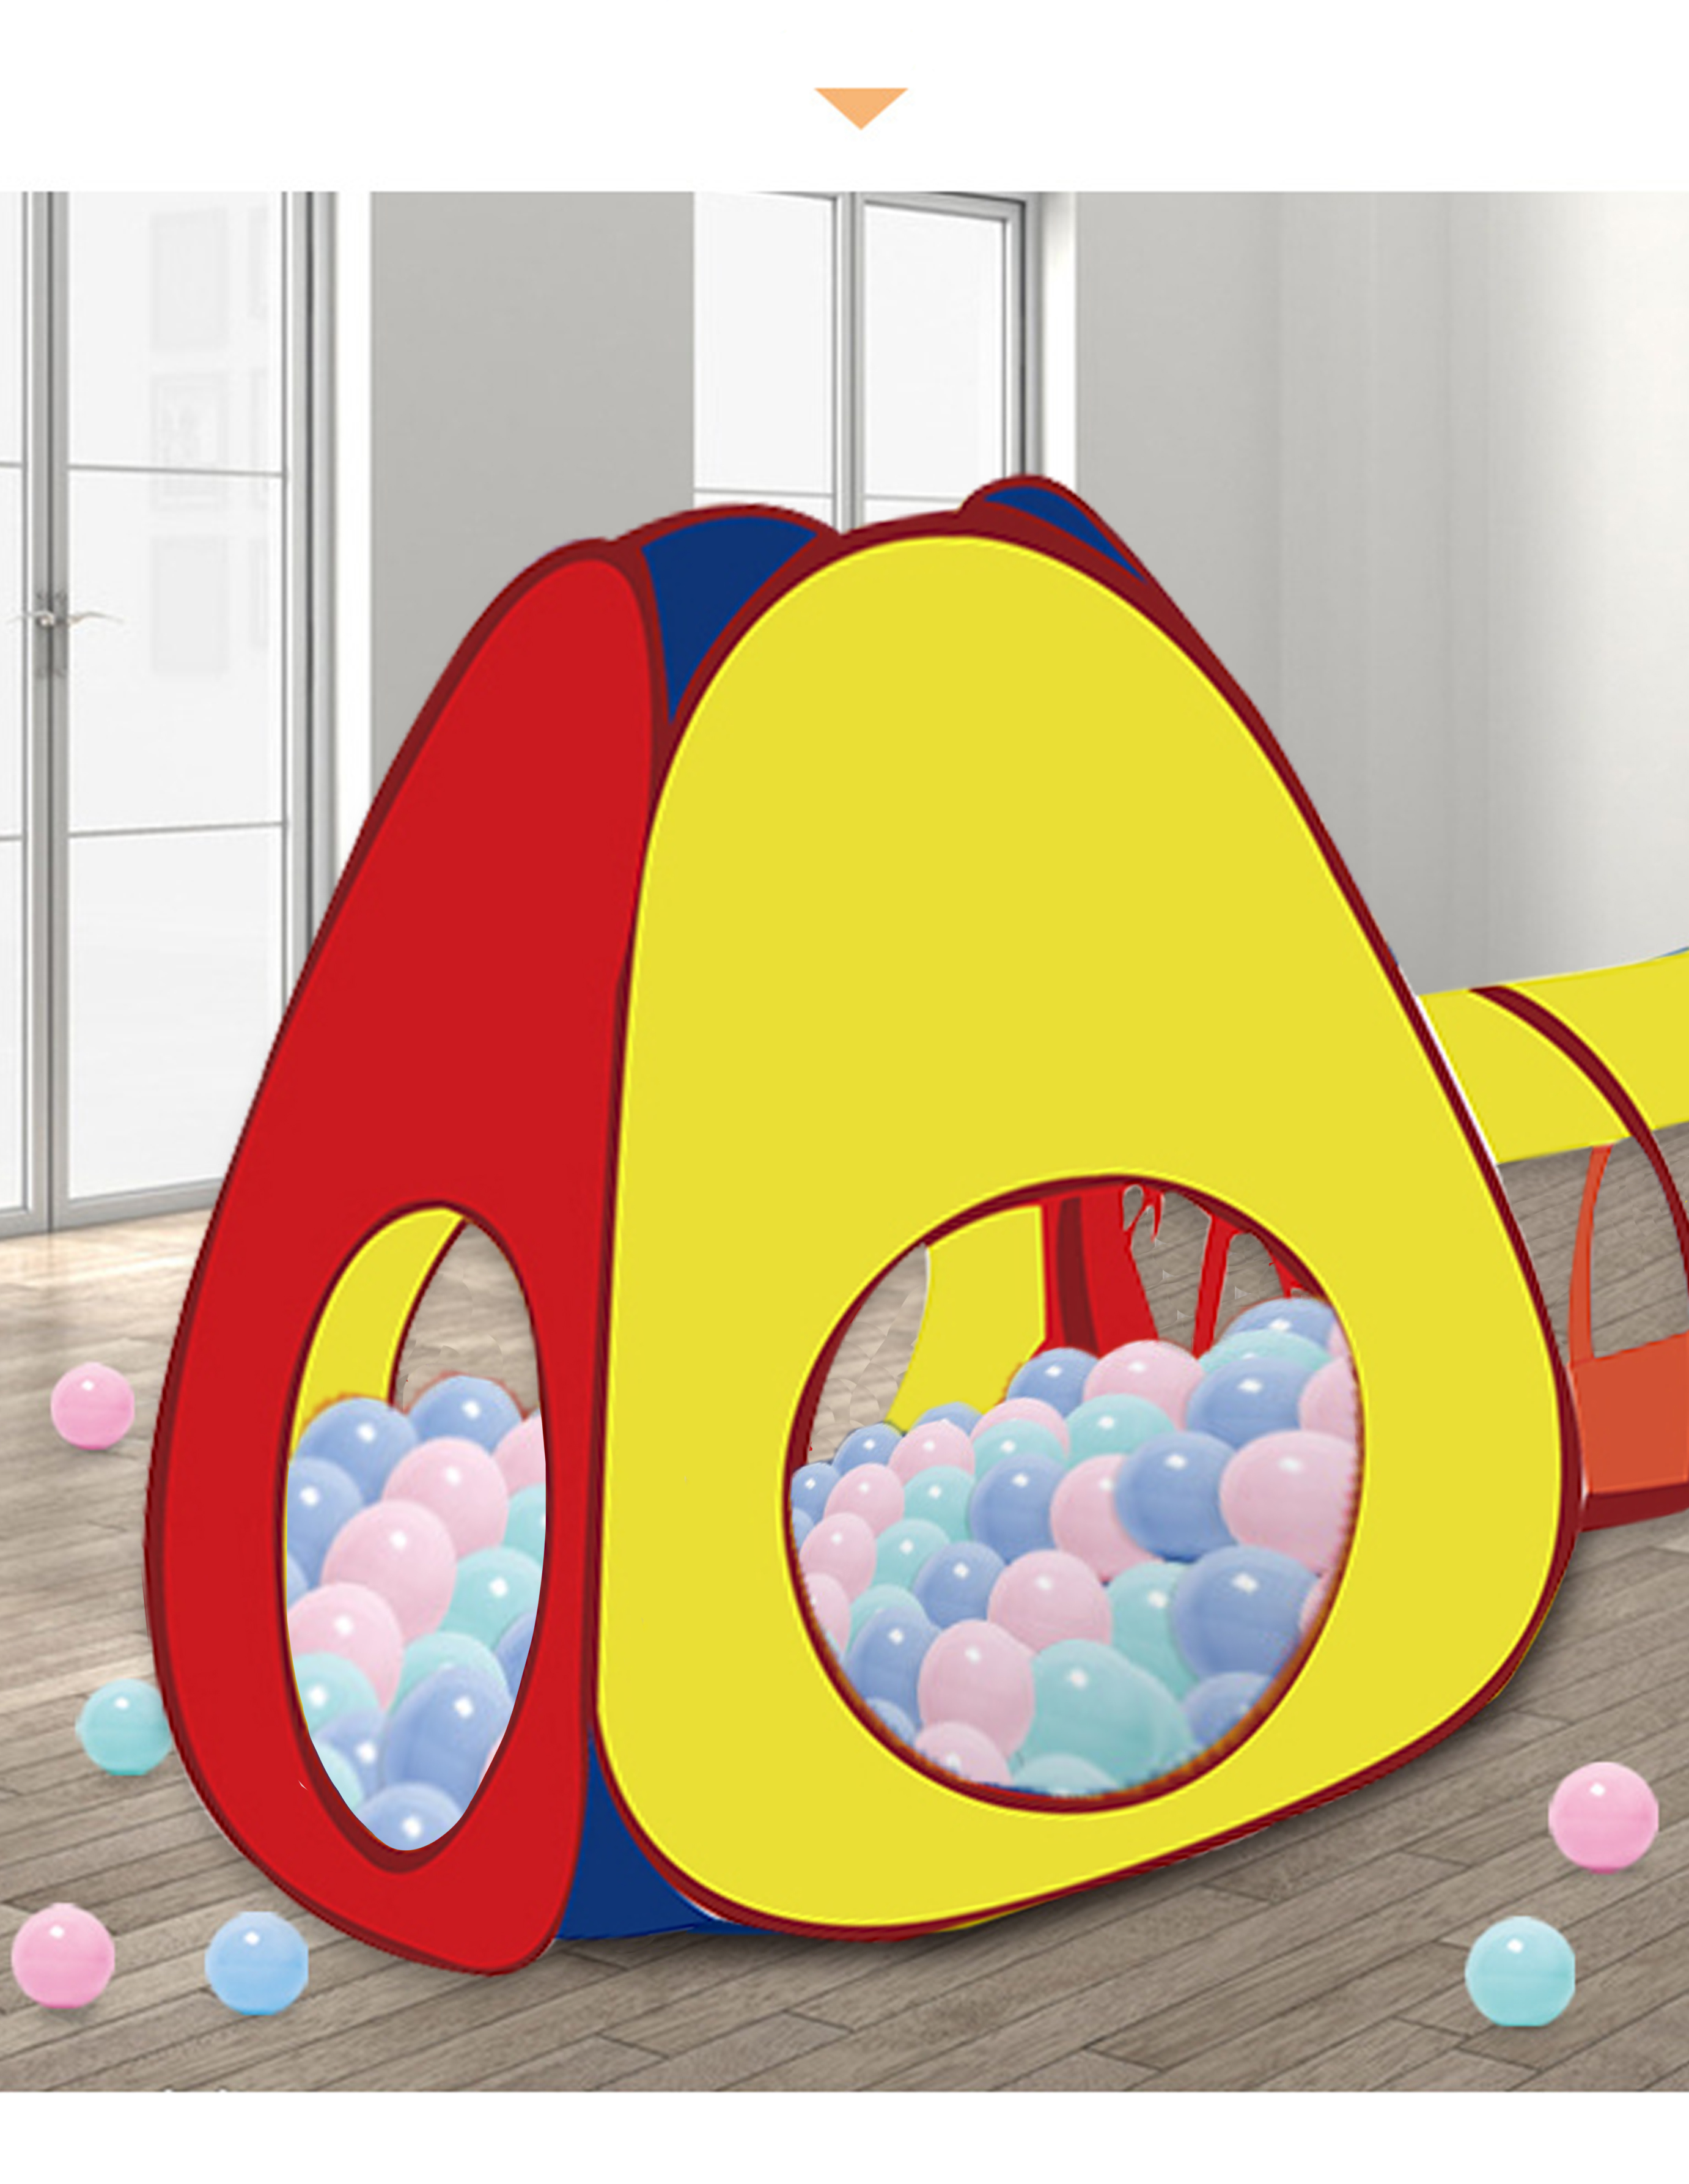 3pcs Ball Play Pool Portable Baby Tunnel Ball Pit Playhouse Kids Play Tent House